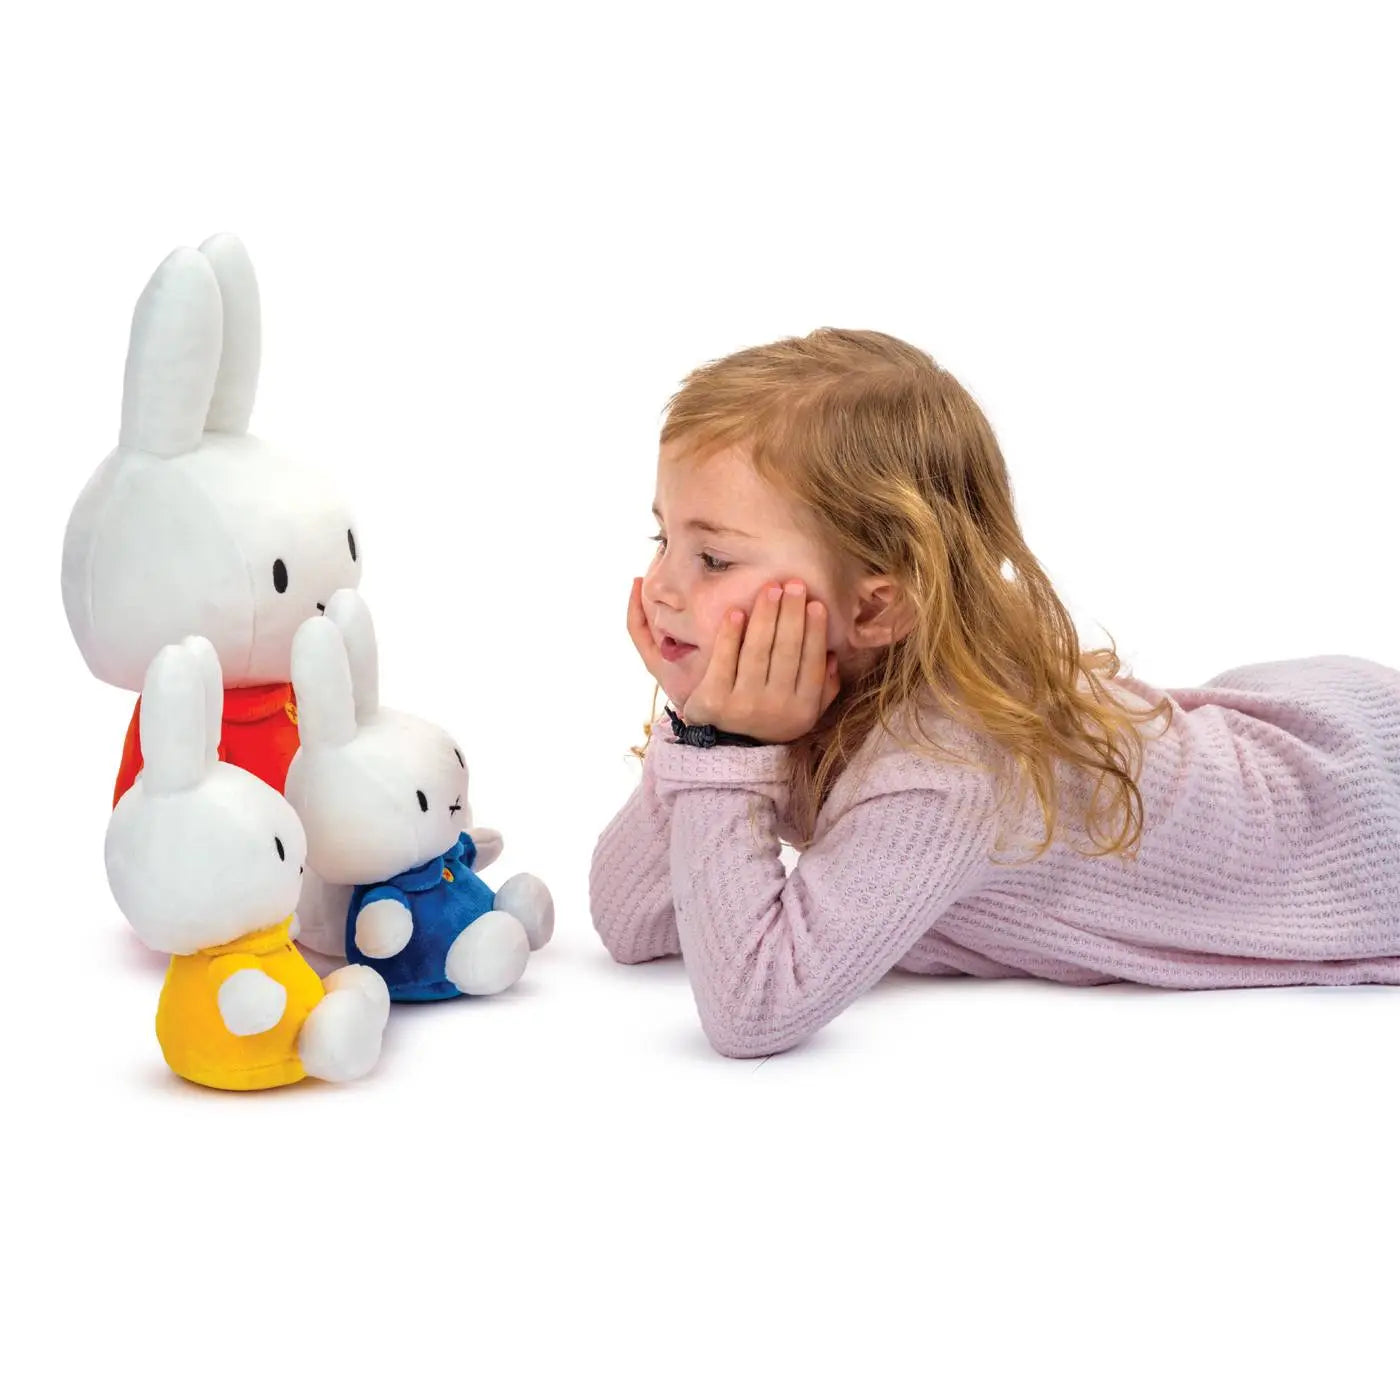 Miffy Plush 7.5in, Classic Red